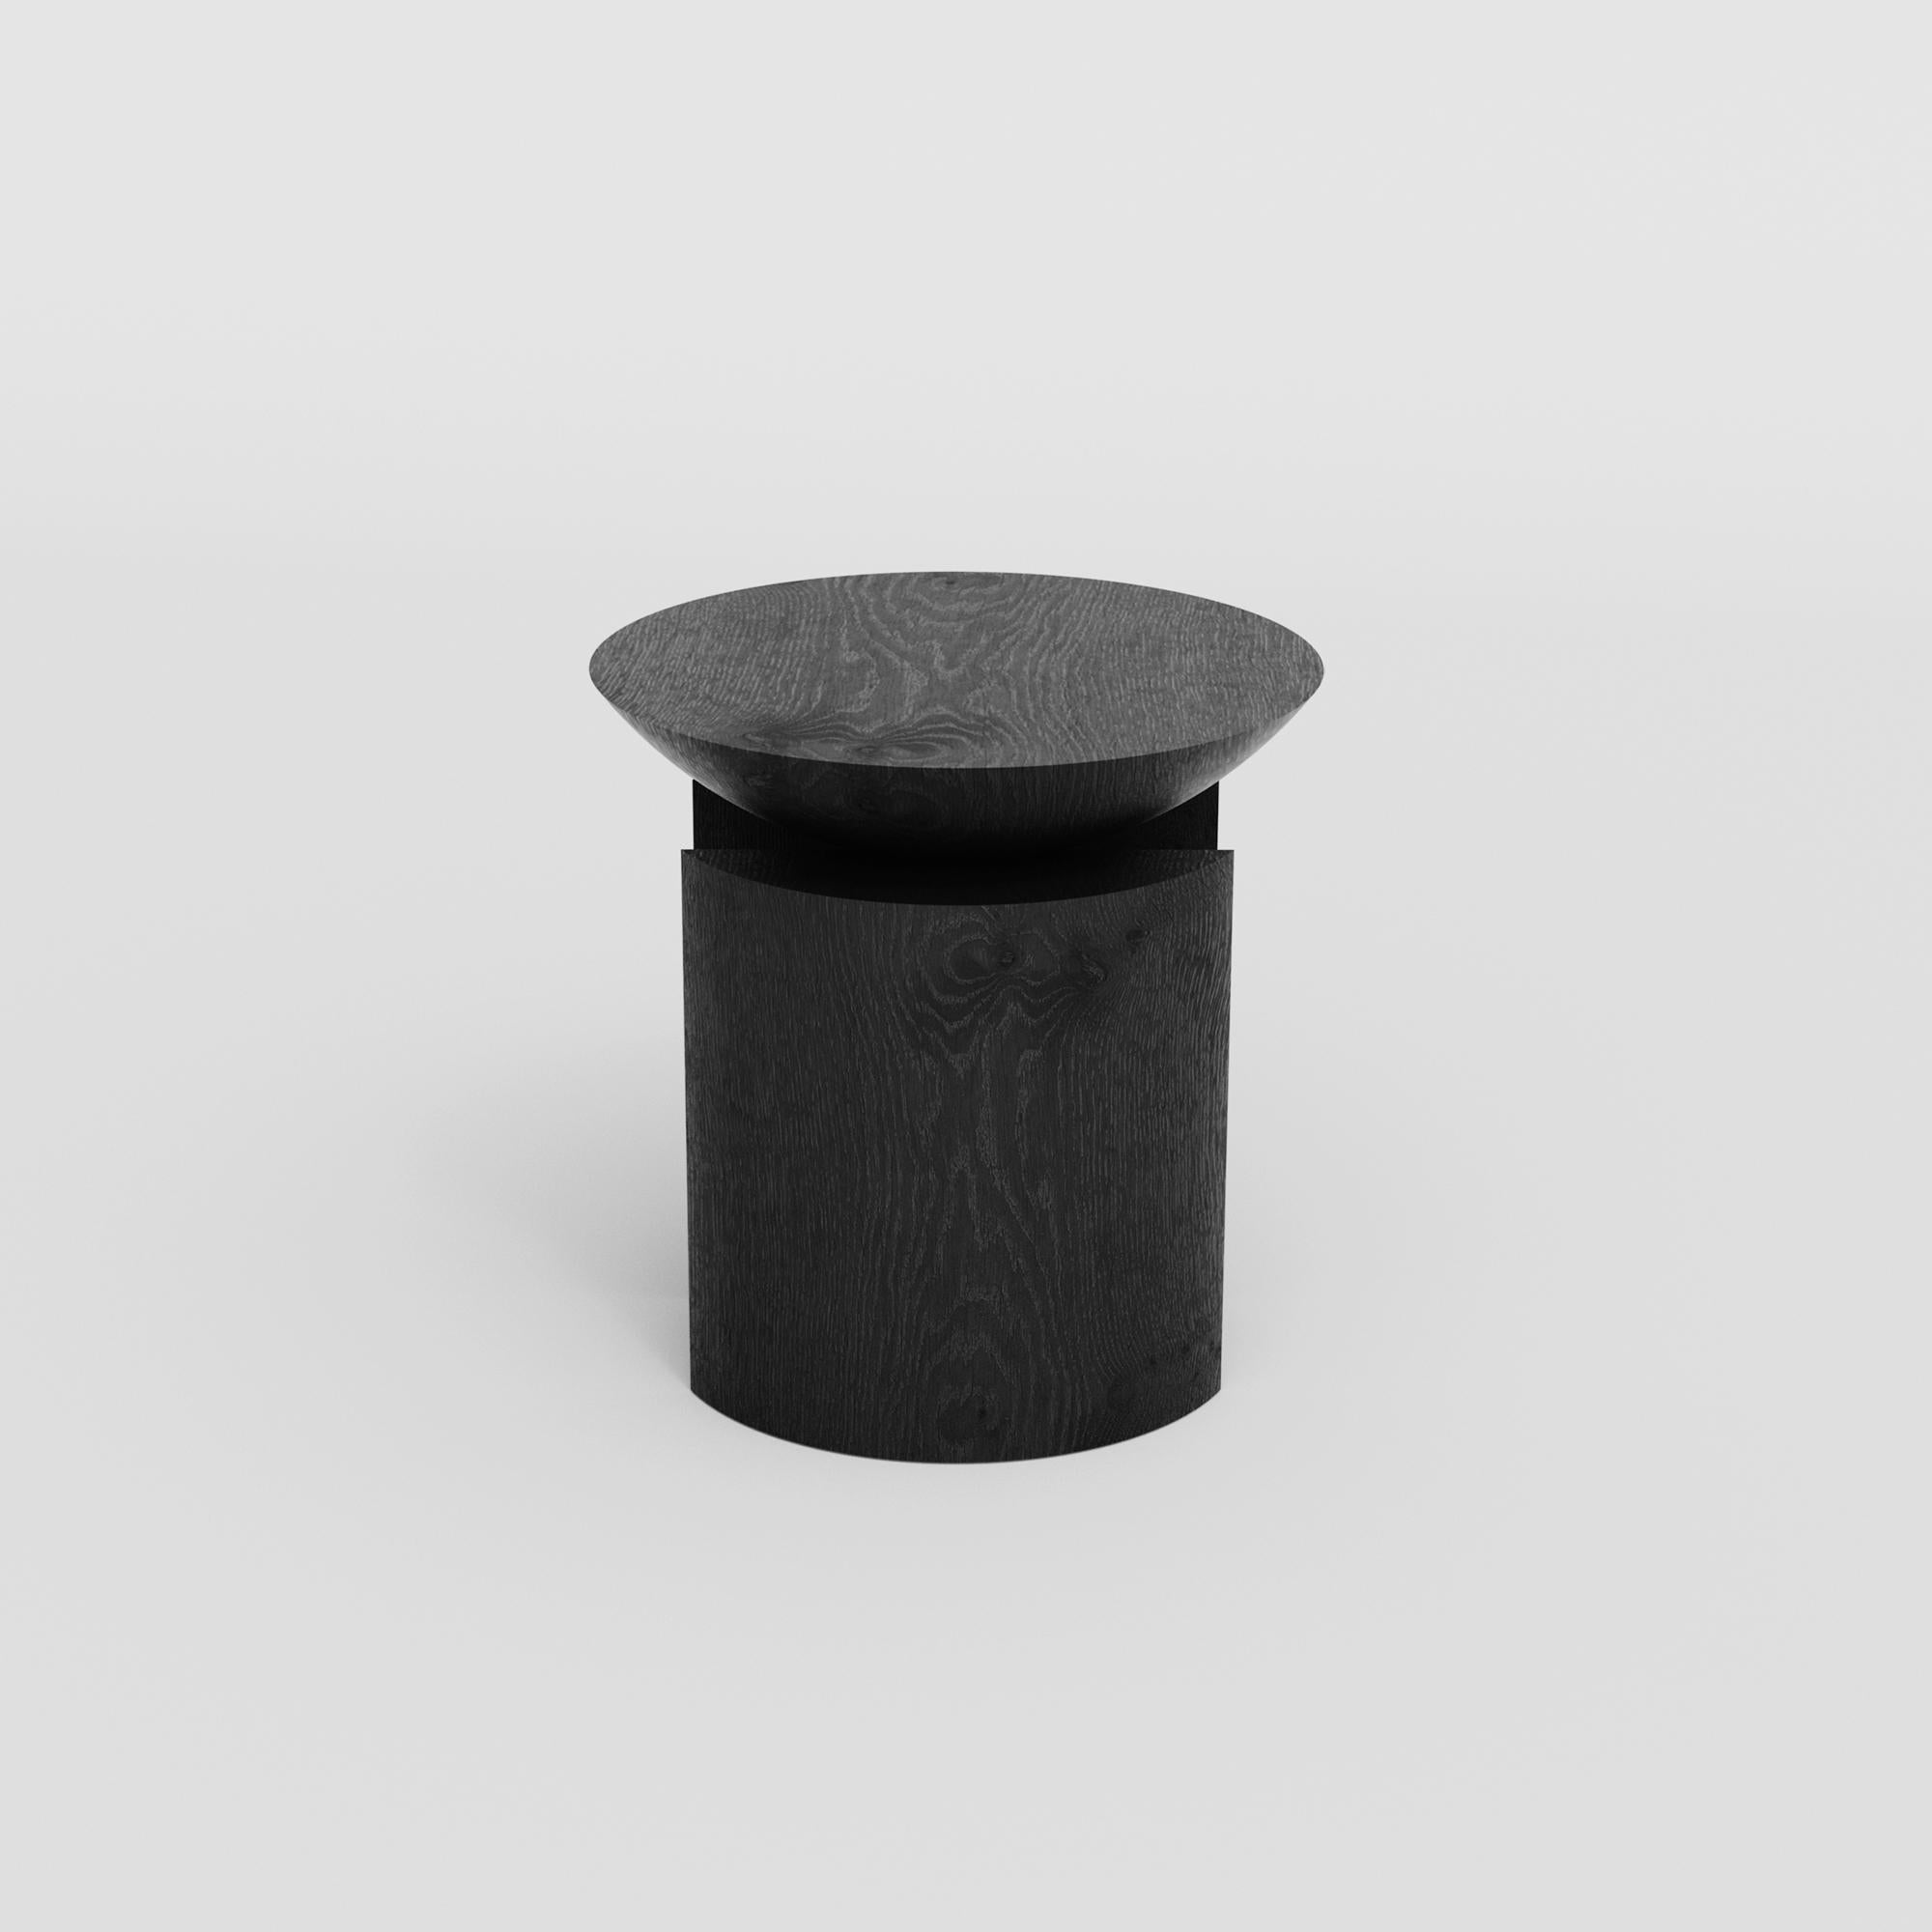 Hand-Crafted Anca Larga / Sculptural Side Table/Stool / Hardwood by Pedro Paulo Venzon For Sale